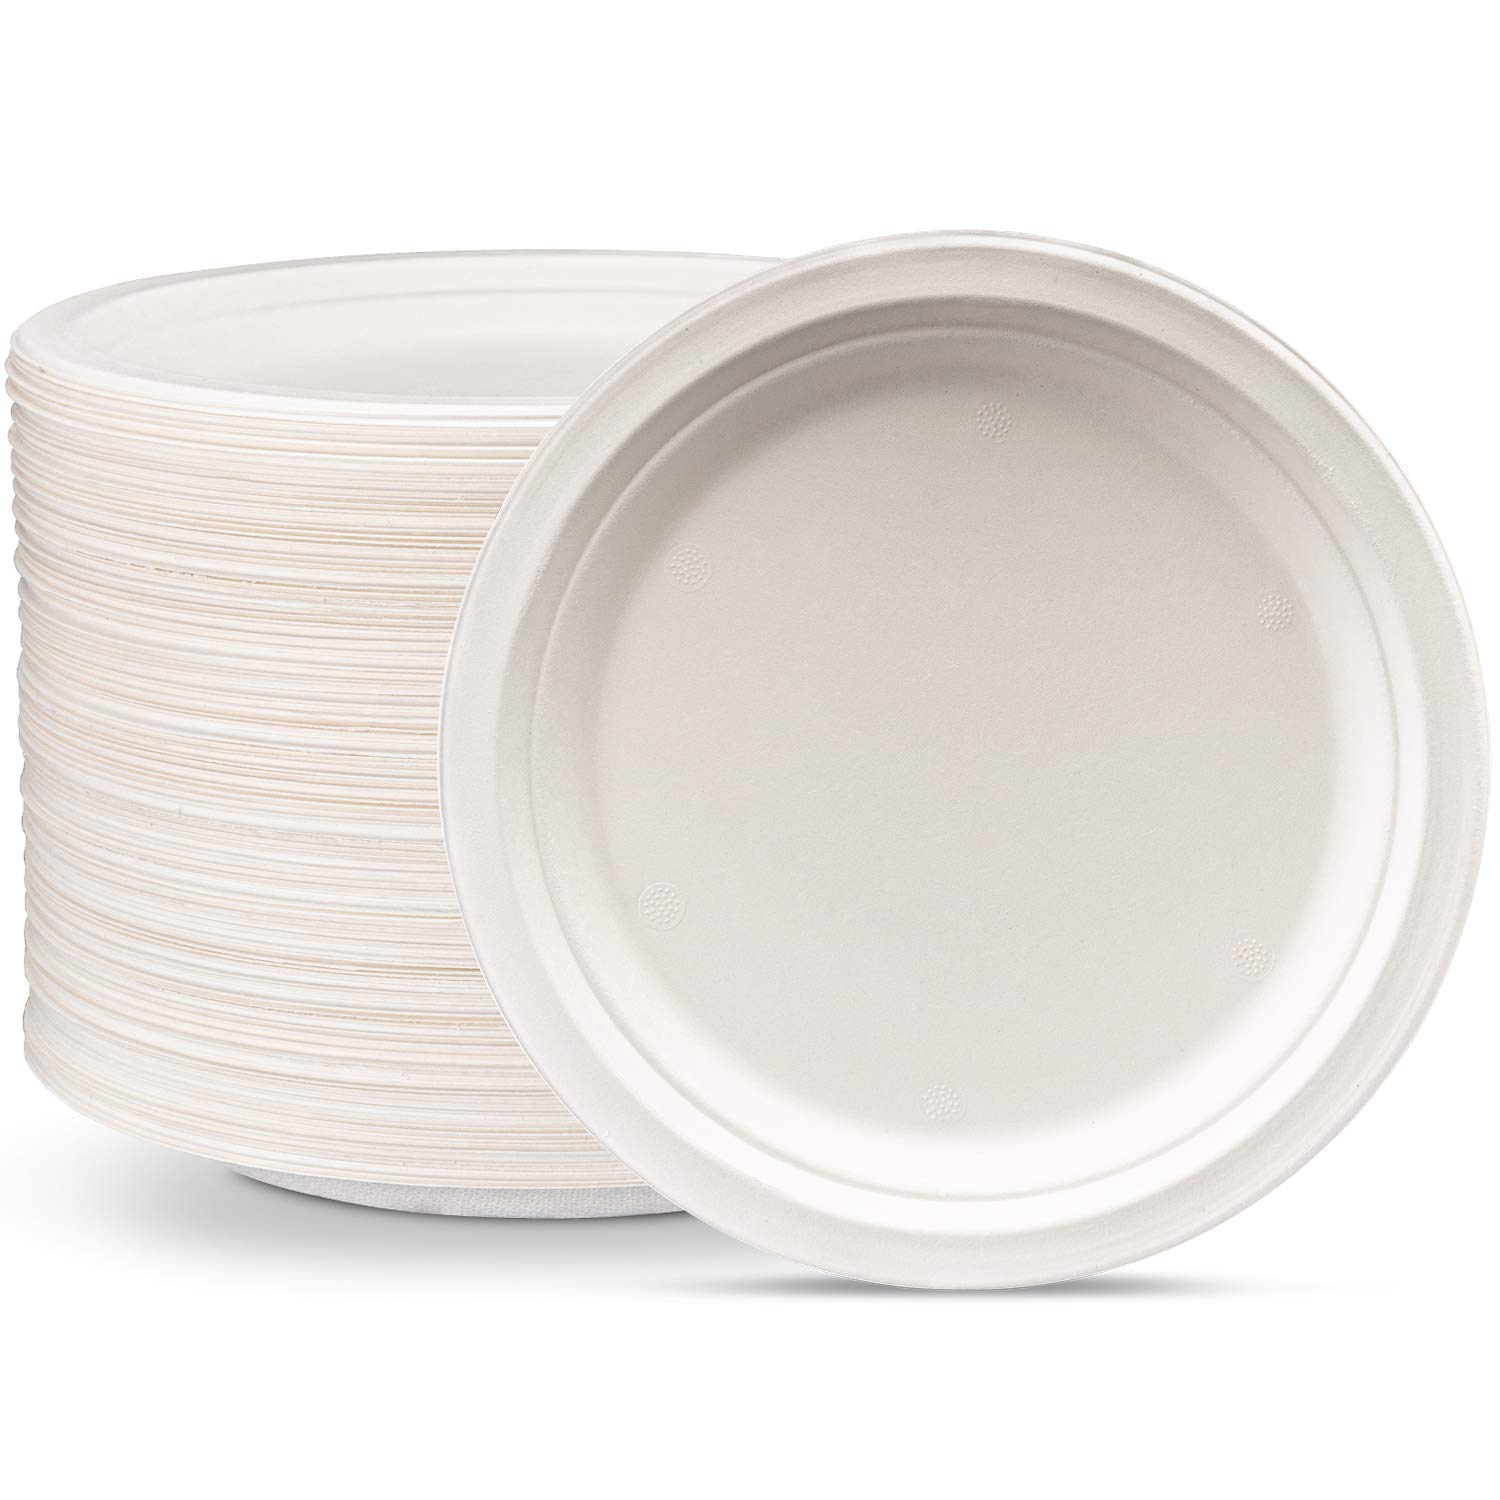 100% Compostable 9 Inch Heavy-Duty Paper Plates 125 Pack Eco-Friendly  Disposable Sugarcane Plates